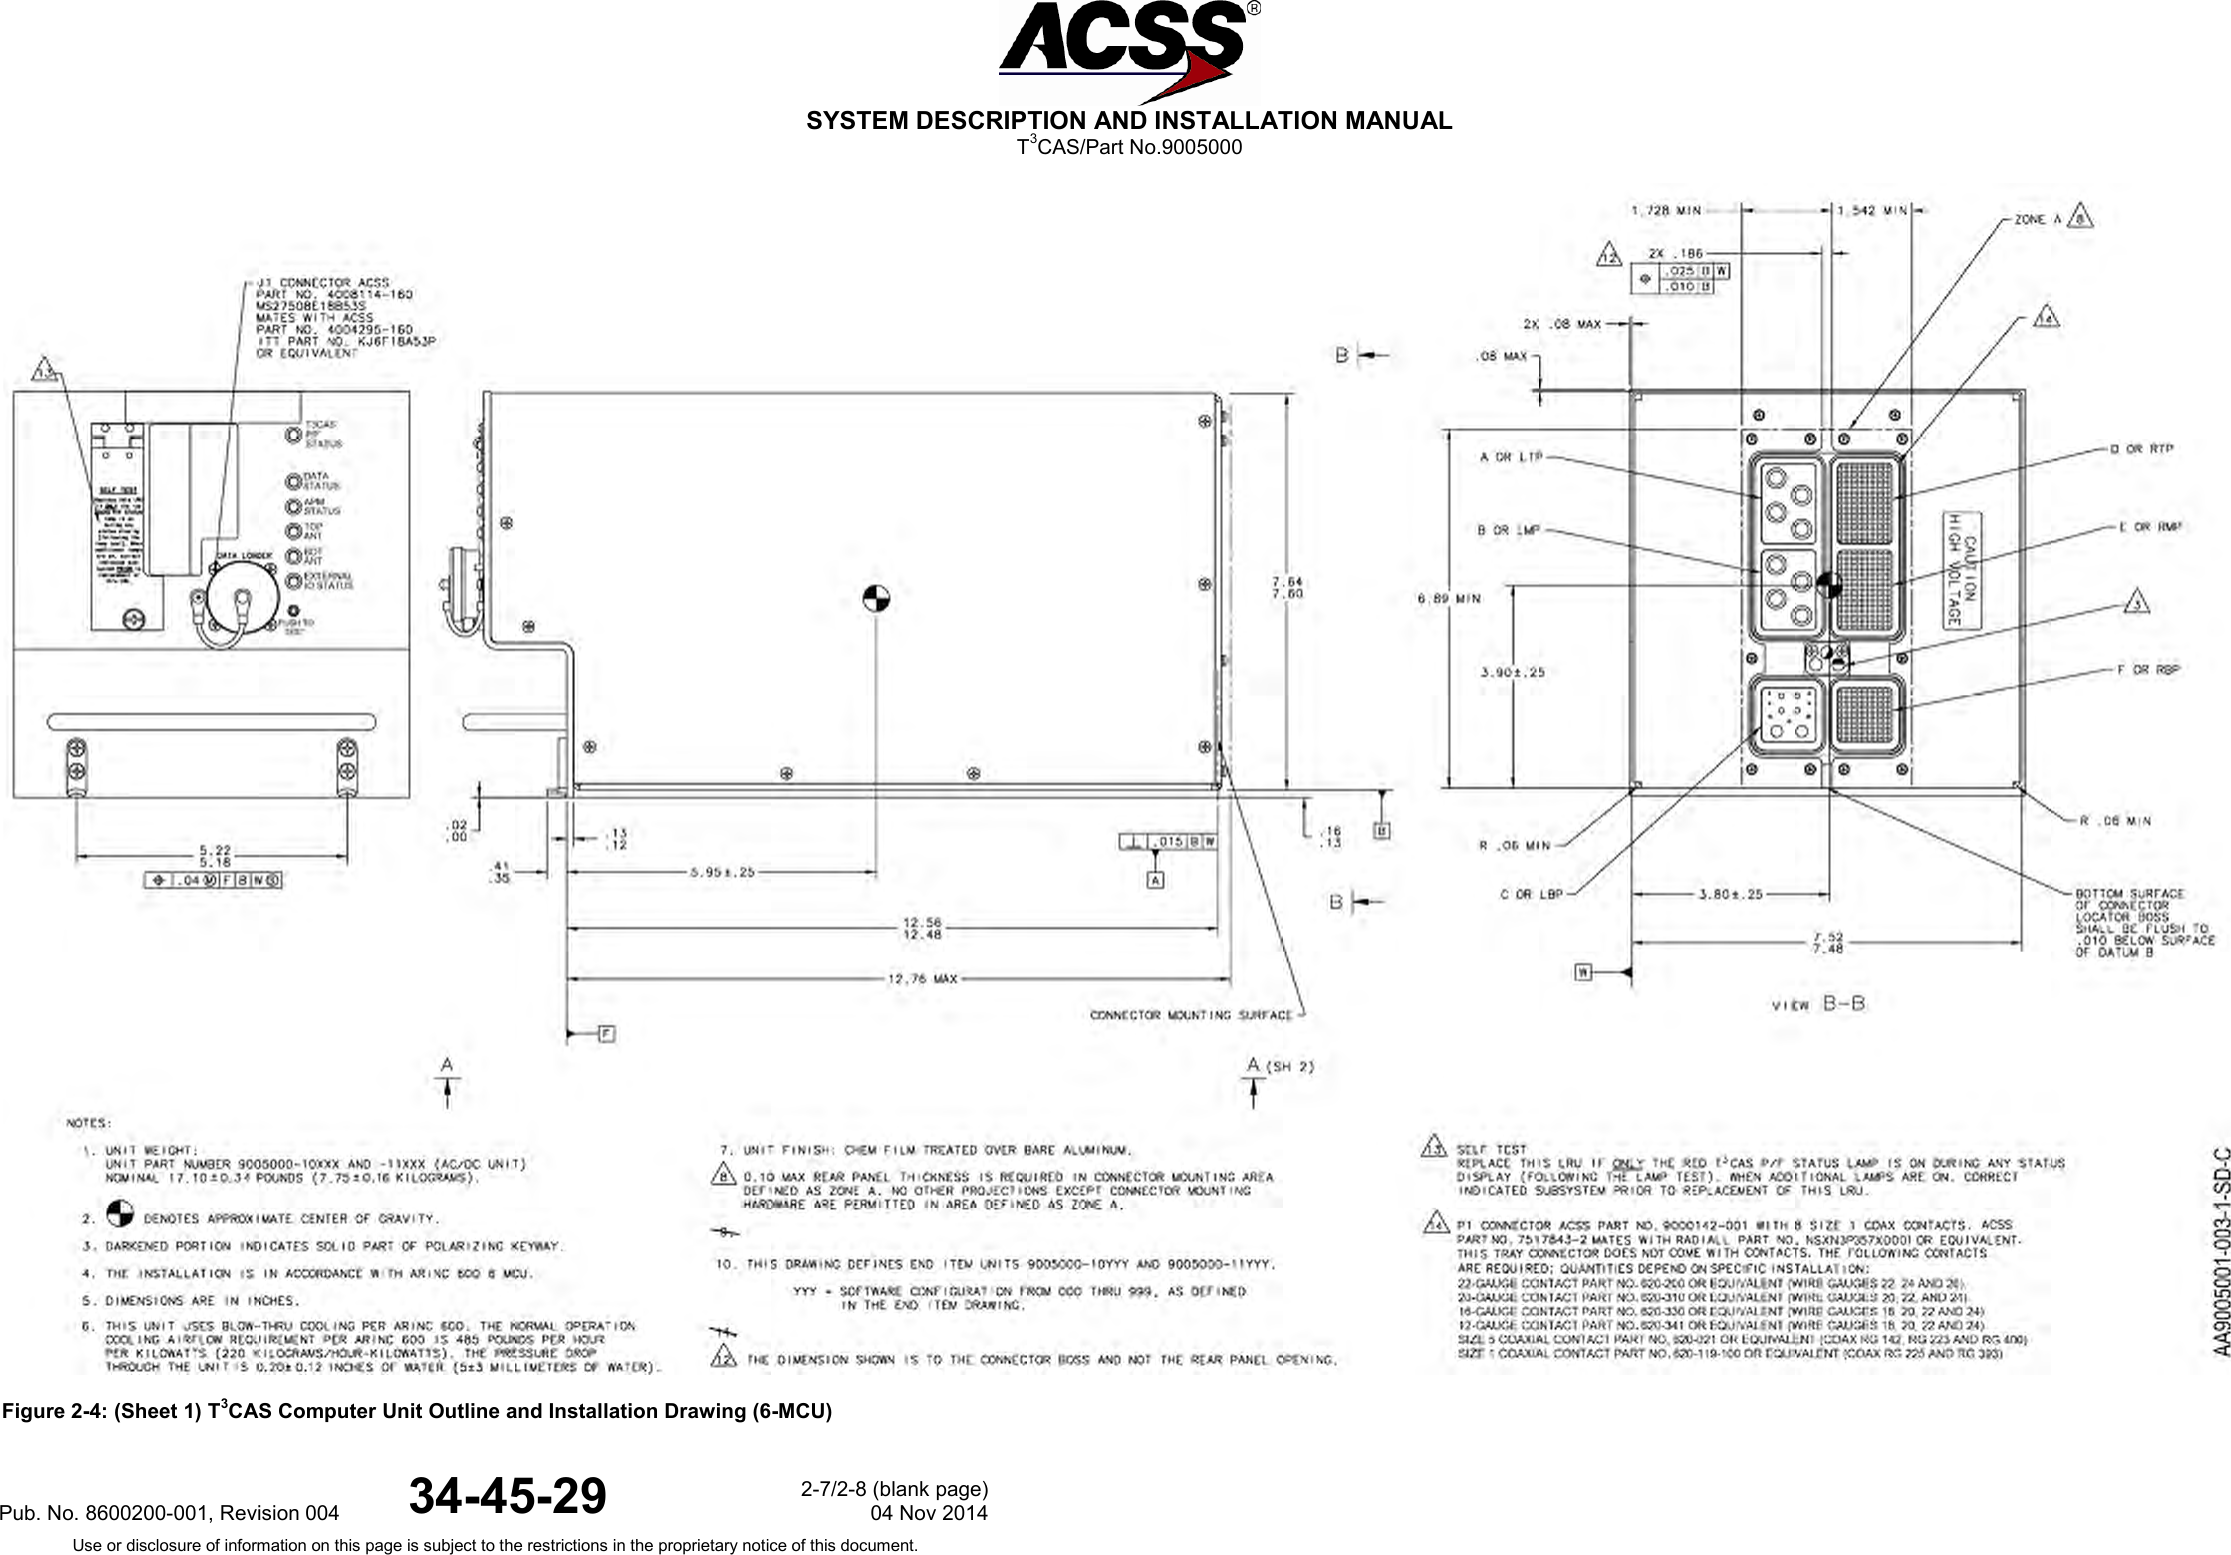  SYSTEM DESCRIPTION AND INSTALLATION MANUAL T3CAS/Part No.9005000  Figure 2-4: (Sheet 1) T3CAS Computer Unit Outline and Installation Drawing (6-MCU)Pub. No. 8600200-001, Revision 004 34-45-29 2-7/2-8 (blank page) 04 Nov 2014 Use or disclosure of information on this page is subject to the restrictions in the proprietary notice of this document.  